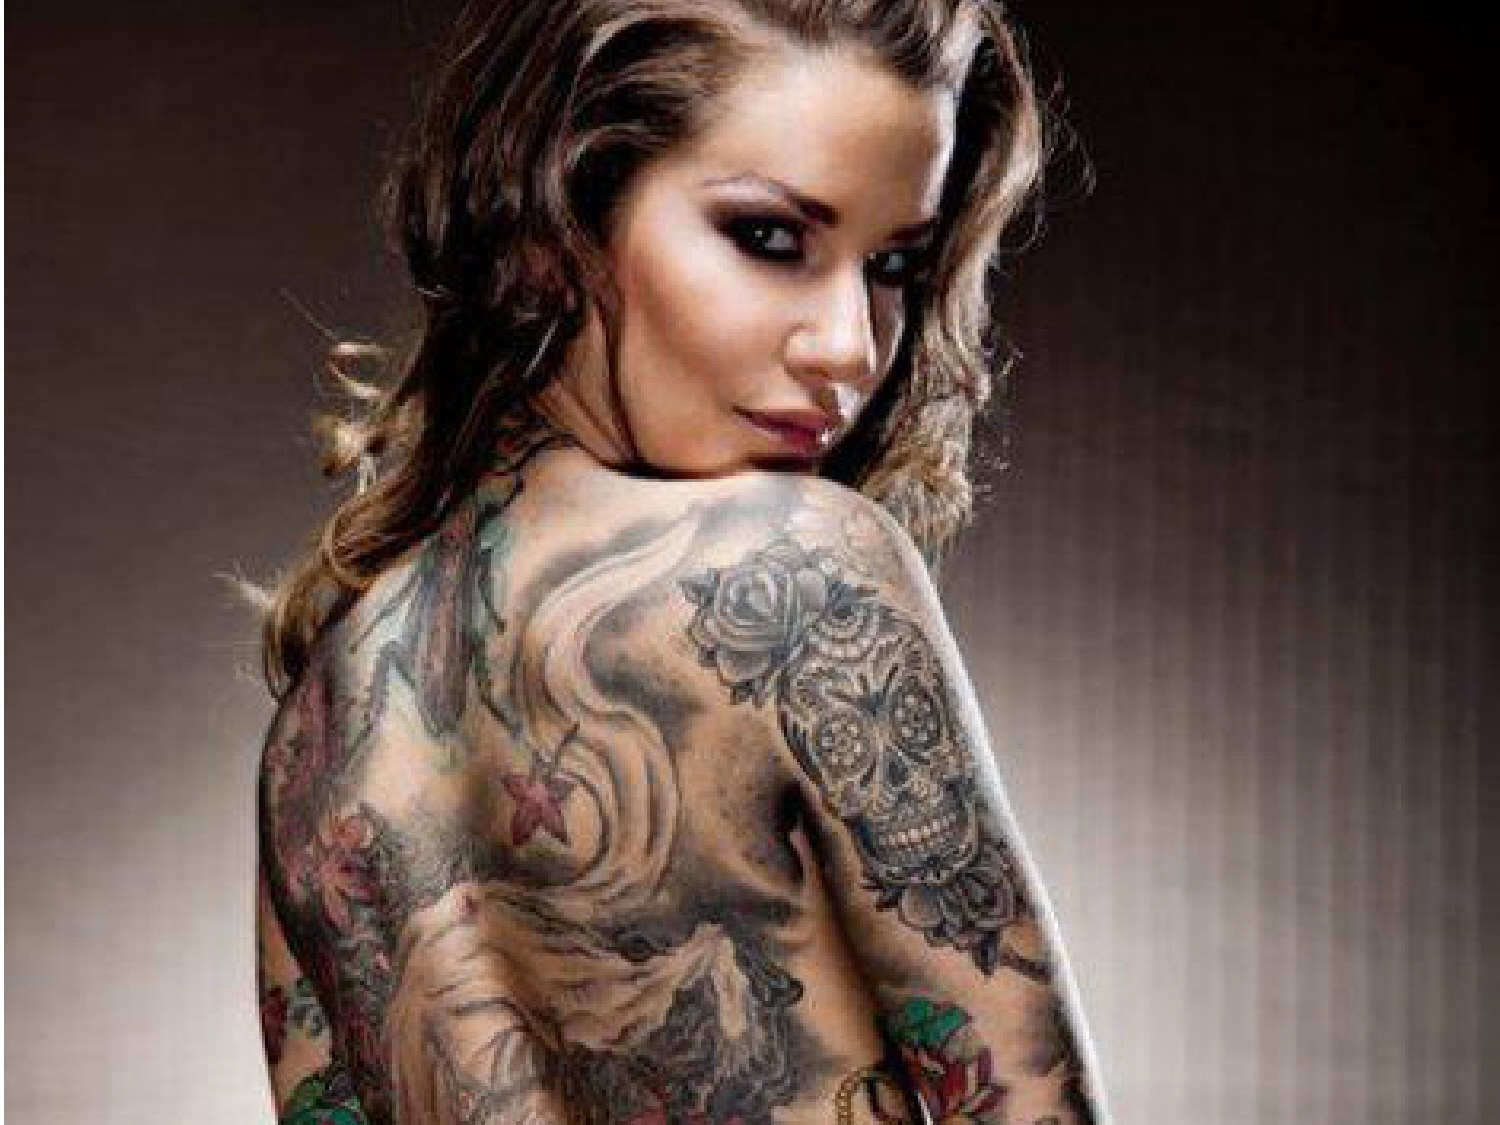 Naked horny women with tattoos